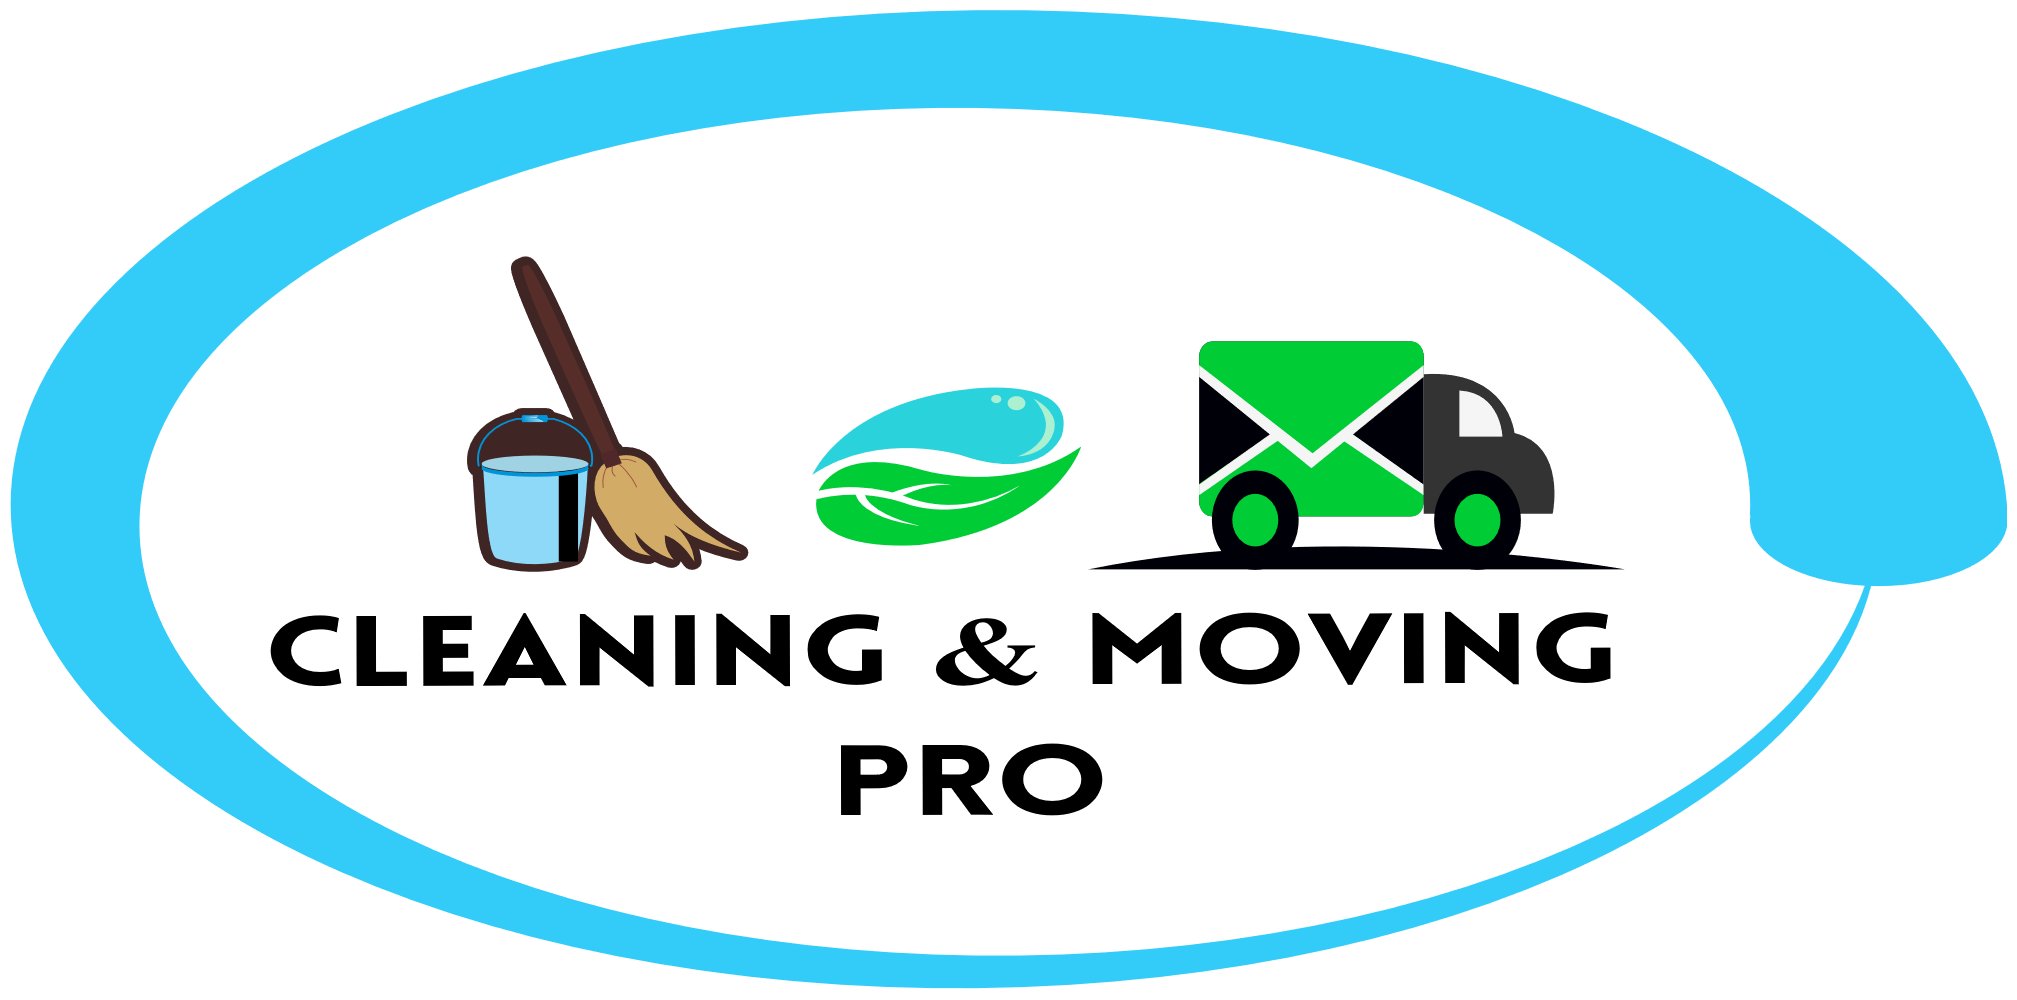 Galway Cleaning / Dublin Cleaning / Limerick Cleaning / Domestic and Commercial Cleaning Contractor / All Cleaning Services / Cleaning company-CLEANING AND MOVING PRO